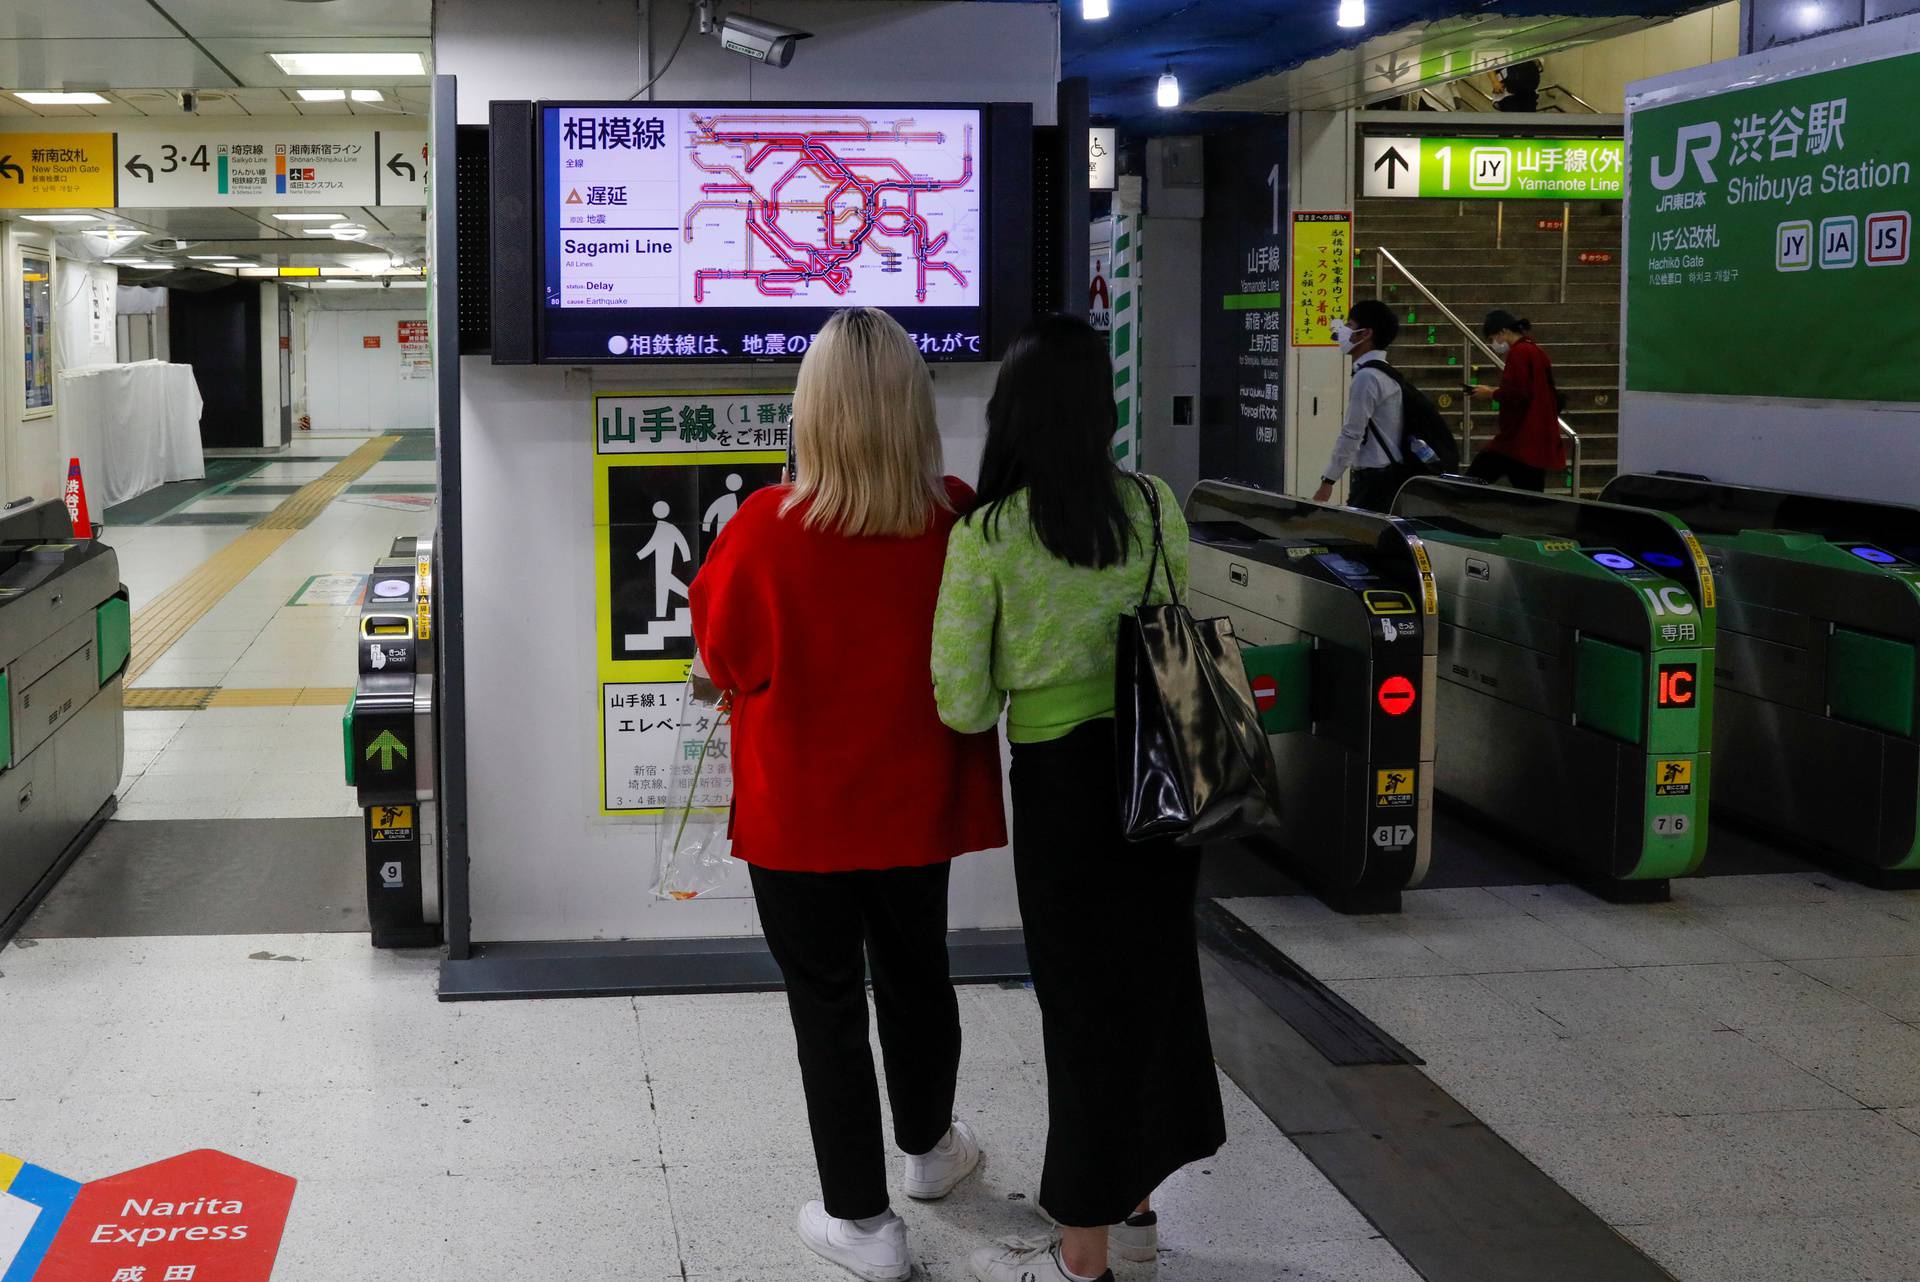 People watch a monitor at Shibuya station, as train services are suspended due to an earthquake, in Tokyo